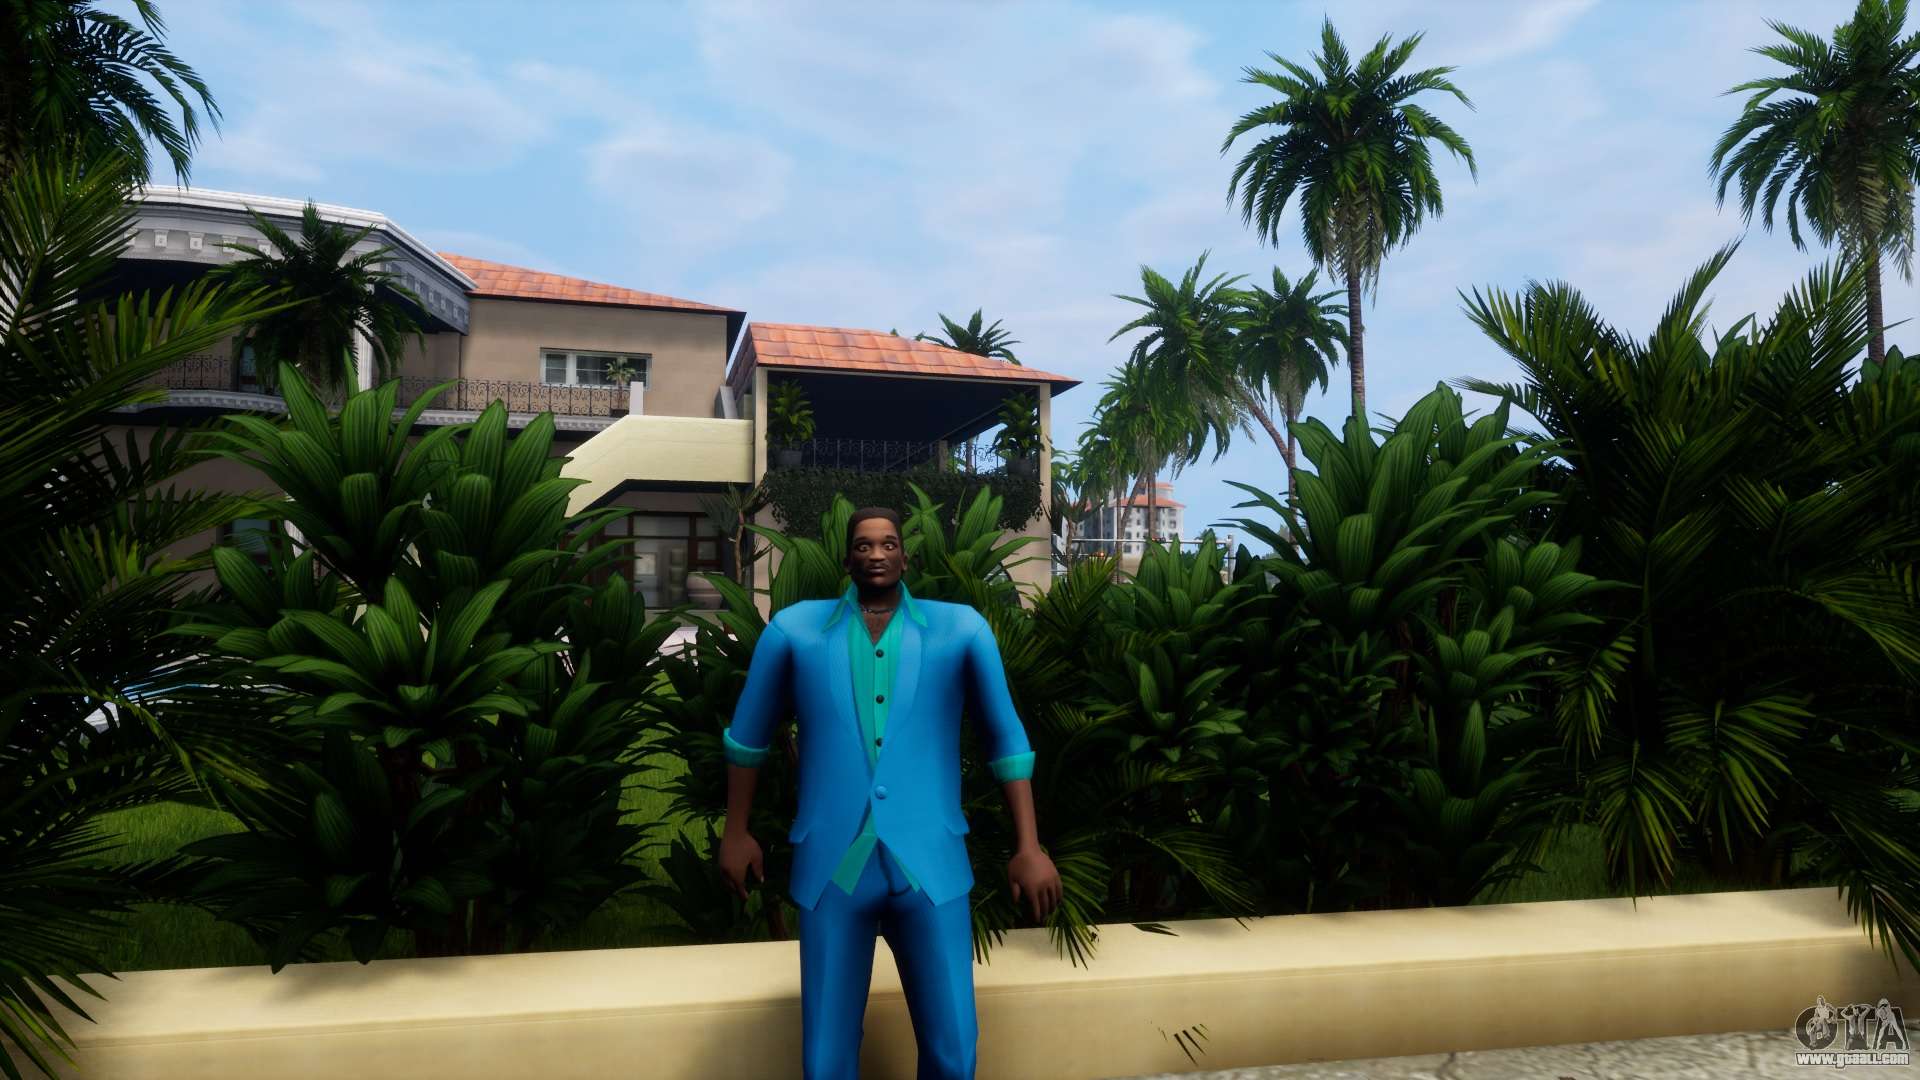 Lance Vance for GTA Vice City Definitive Edition